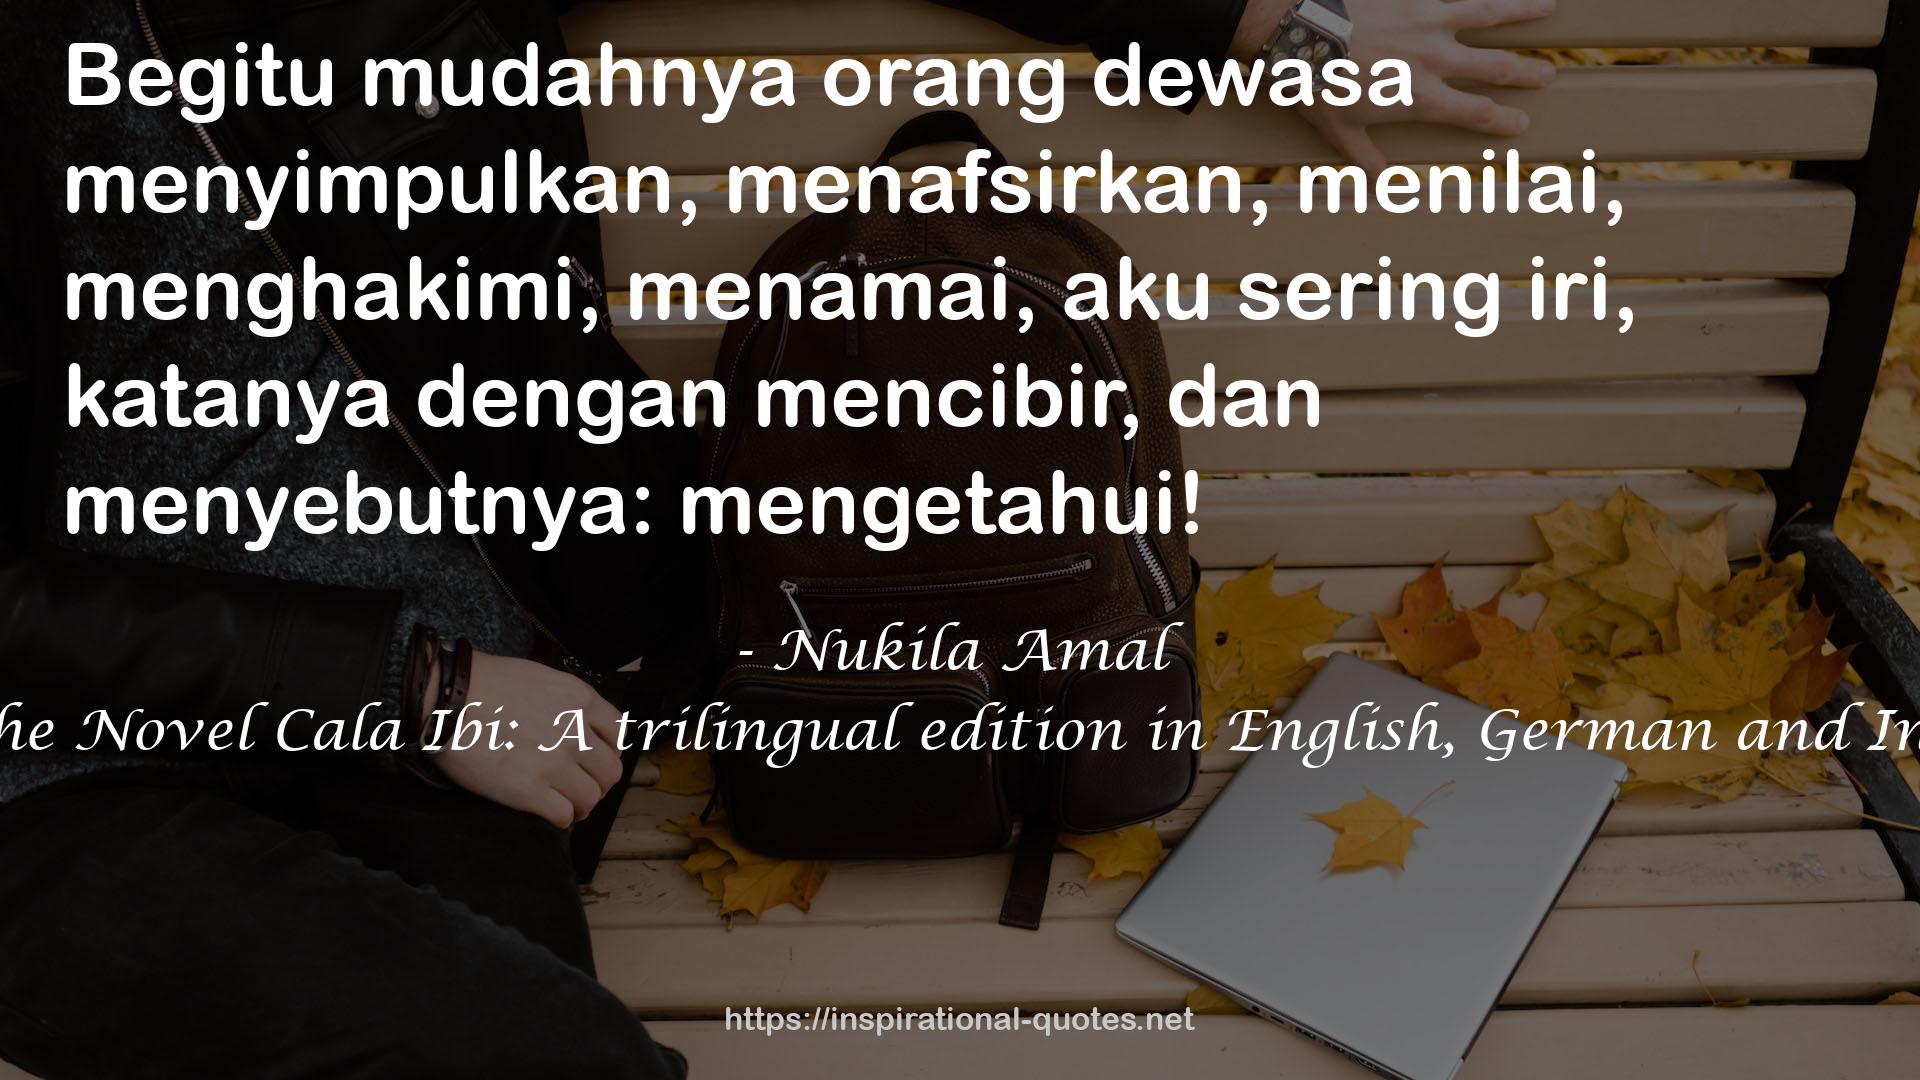 Excerpts from the Novel Cala Ibi: A trilingual edition in English, German and Indonesian (BTW) QUOTES